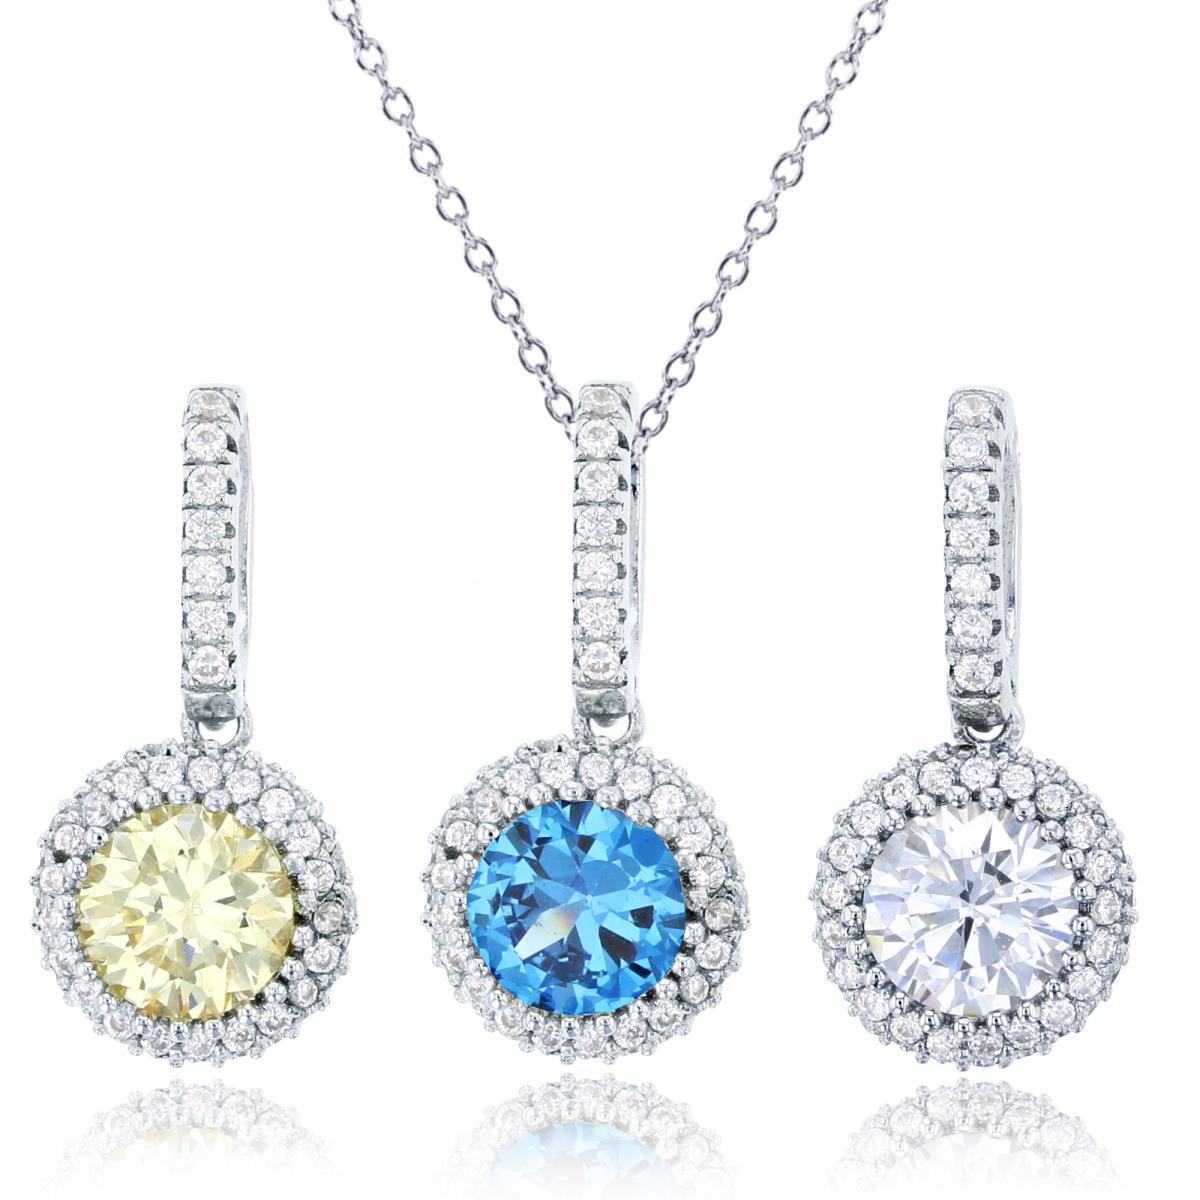 Sterling Silver Rhodium 6mm Rnd White, Yellow & Blue Spinel Puffy Set of 3 Pendants & 18" Chain